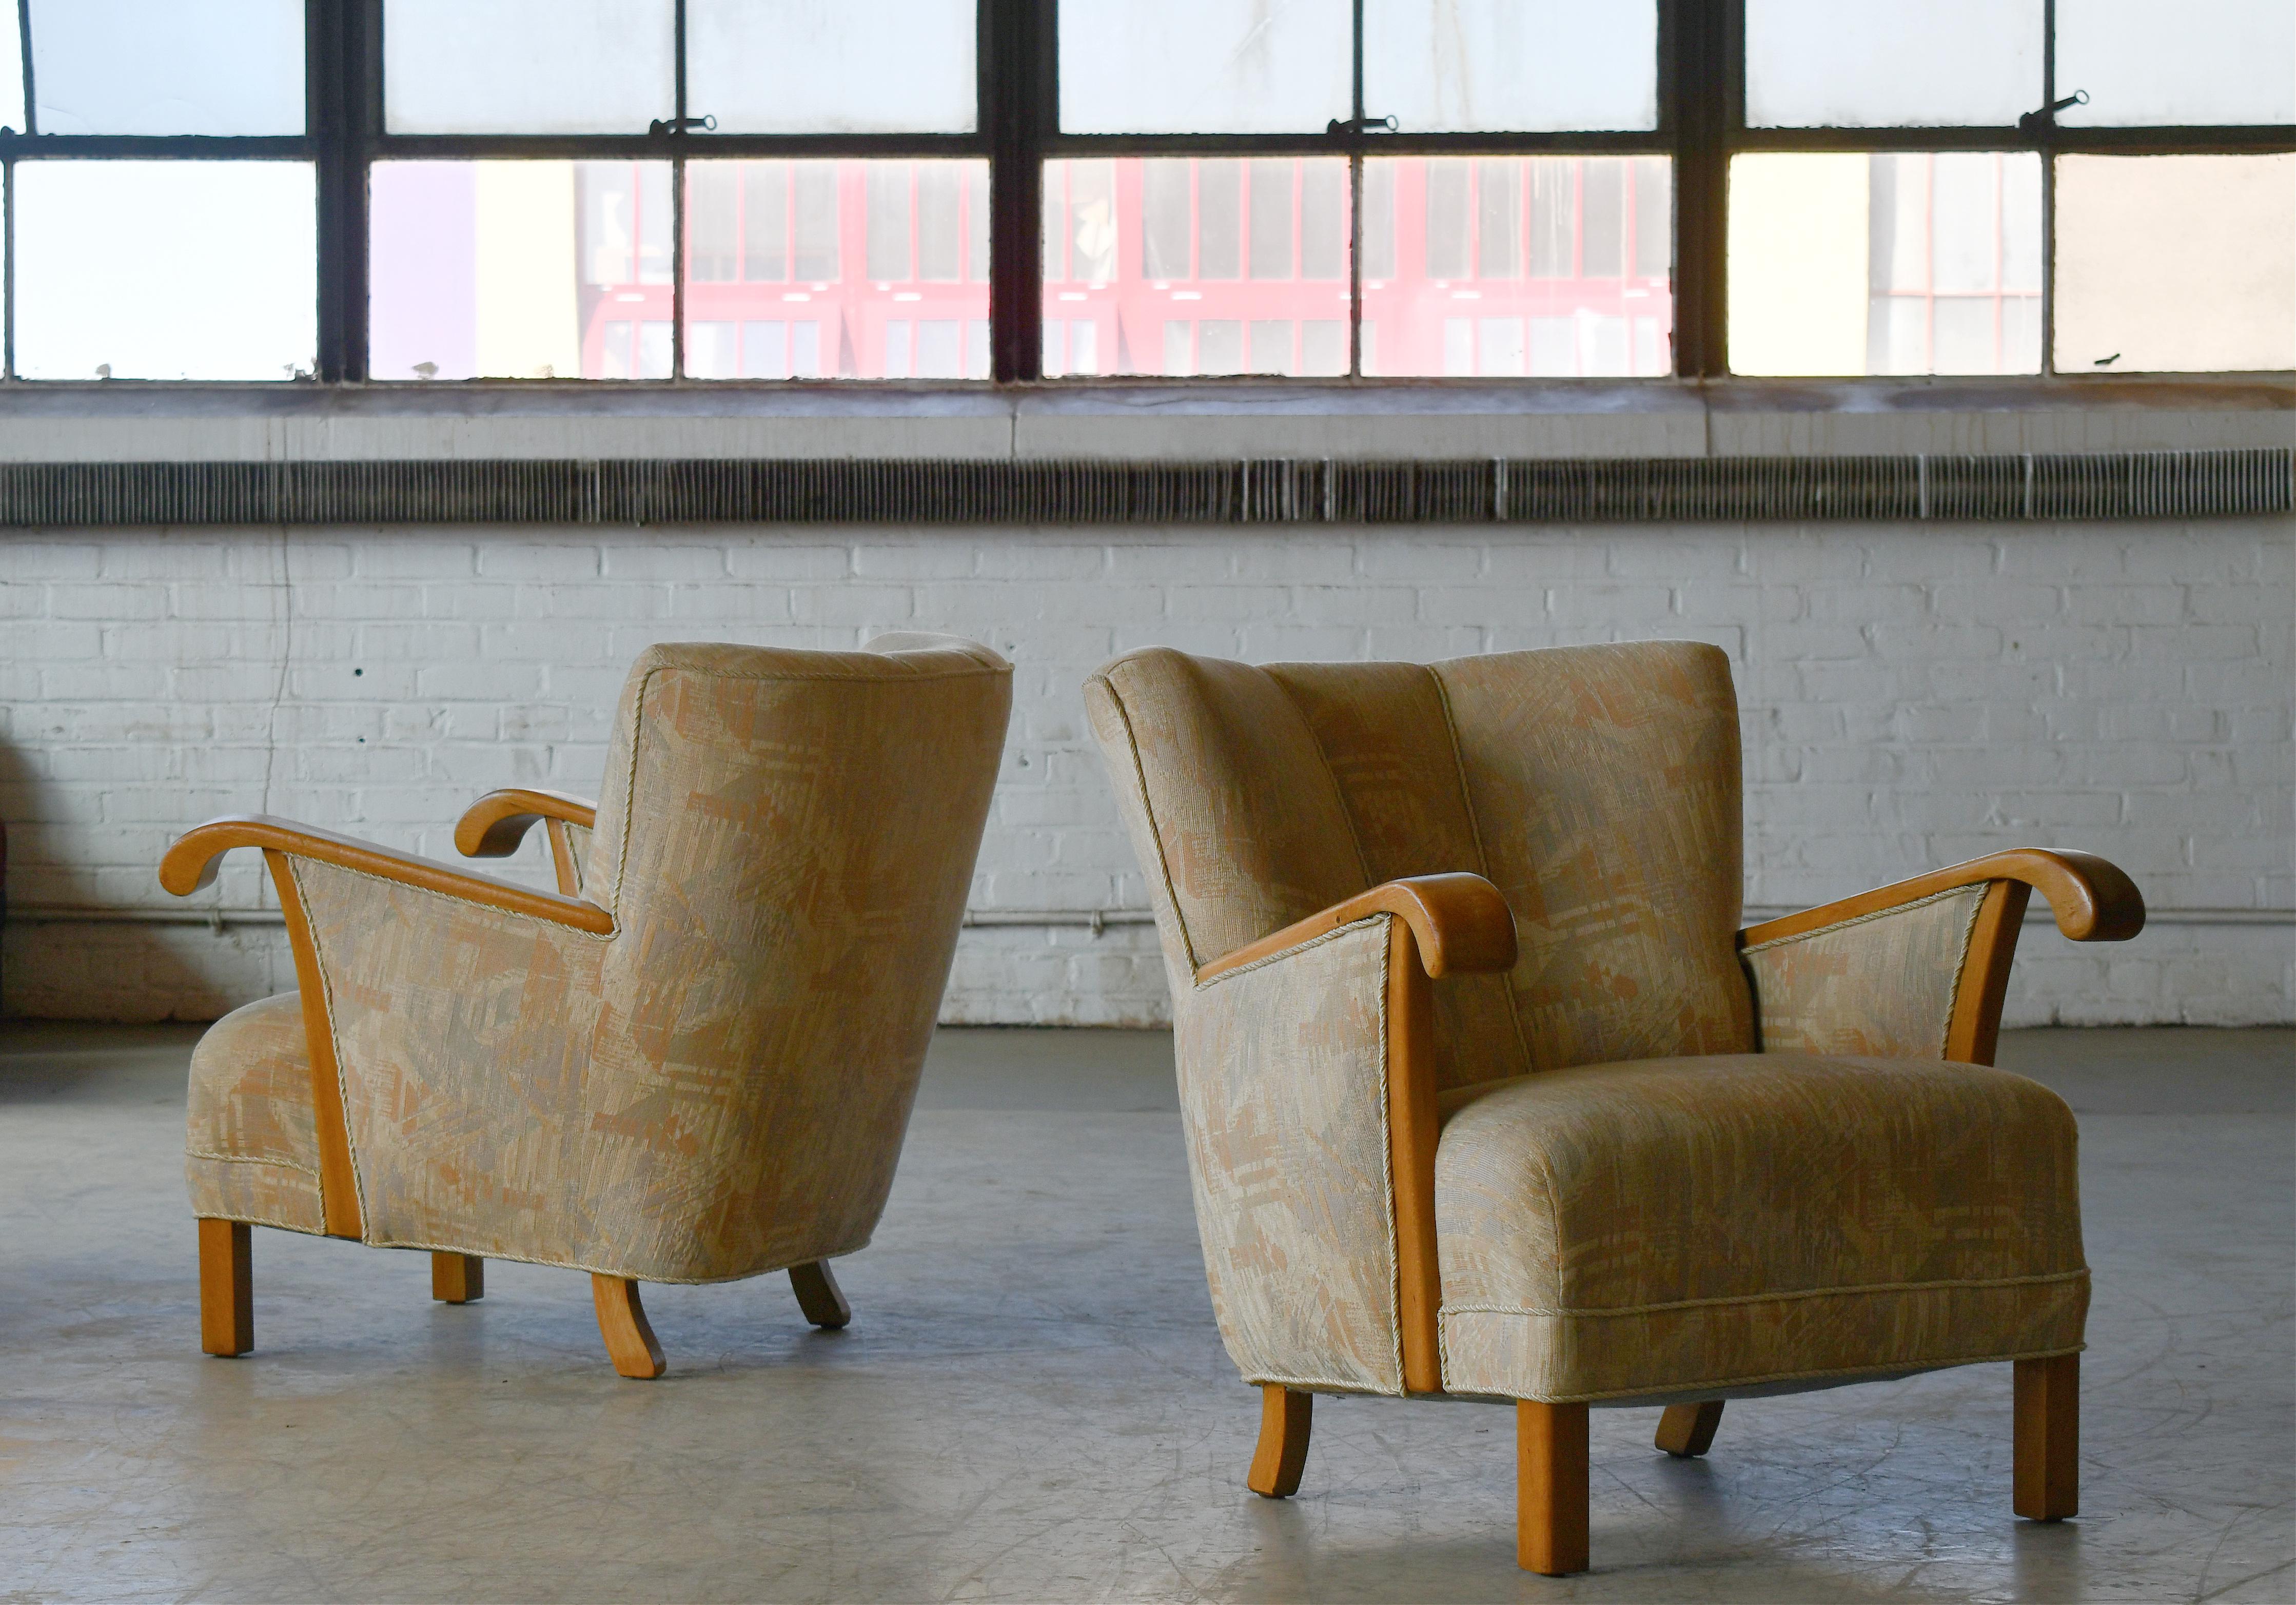 Pair of elegant  easy chairs from the late 1940s very typical of Fritz Hansen's design style both in terms of legs and armrests leading many dealers in Denmark to believe the chairs are indeed by Fritz Hansen. But nobody knows for sure. These type